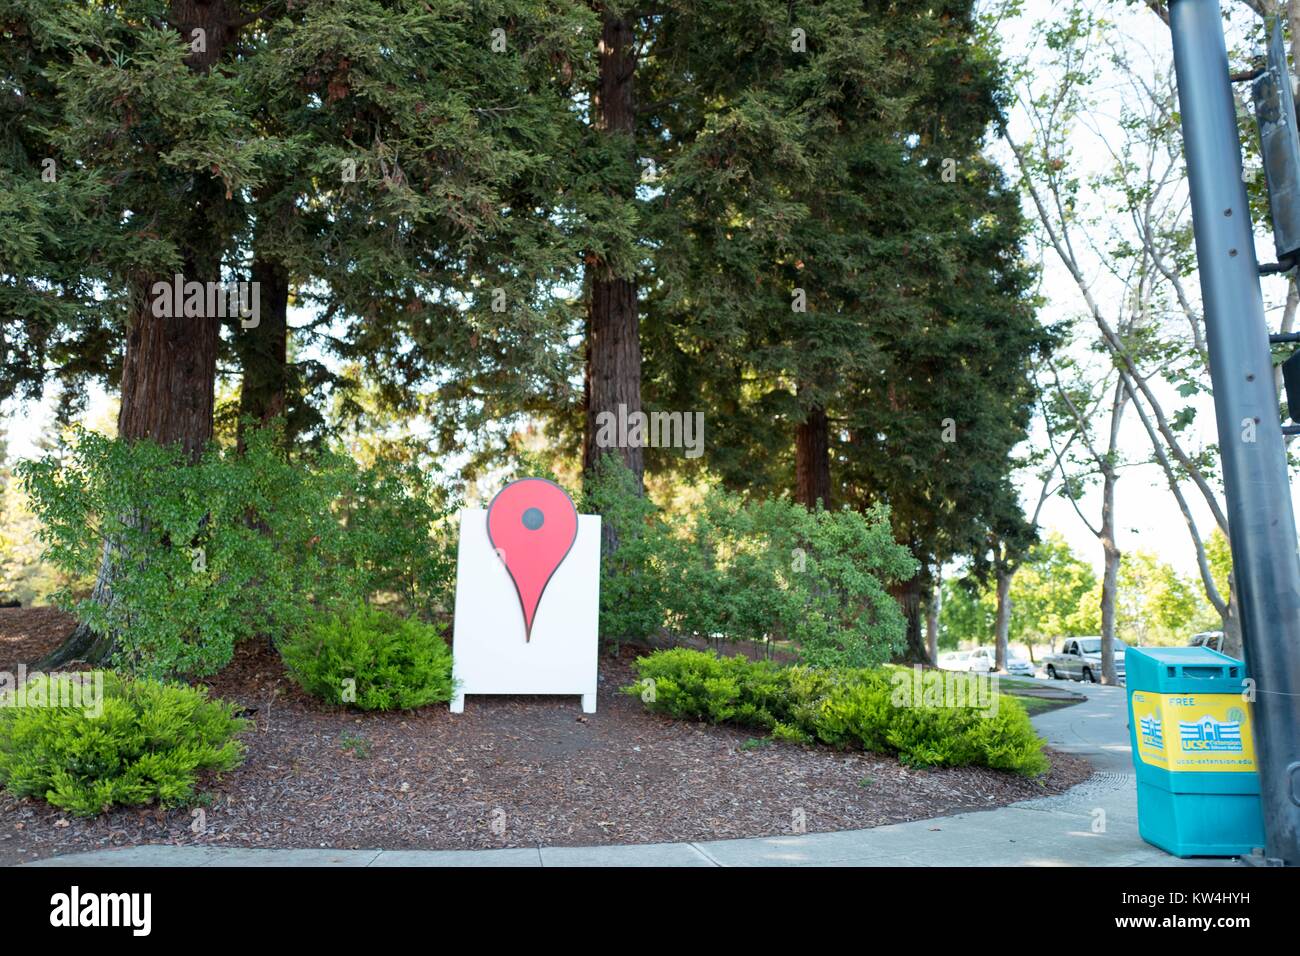 Life-sized representation of the iconic red pin from the Google Maps mapping application installed in a wooded area at the Googleplex, headquarters of the search engine company Google in the Silicon Valley town of Mountain View, California, August 24, 2016. Stock Photo